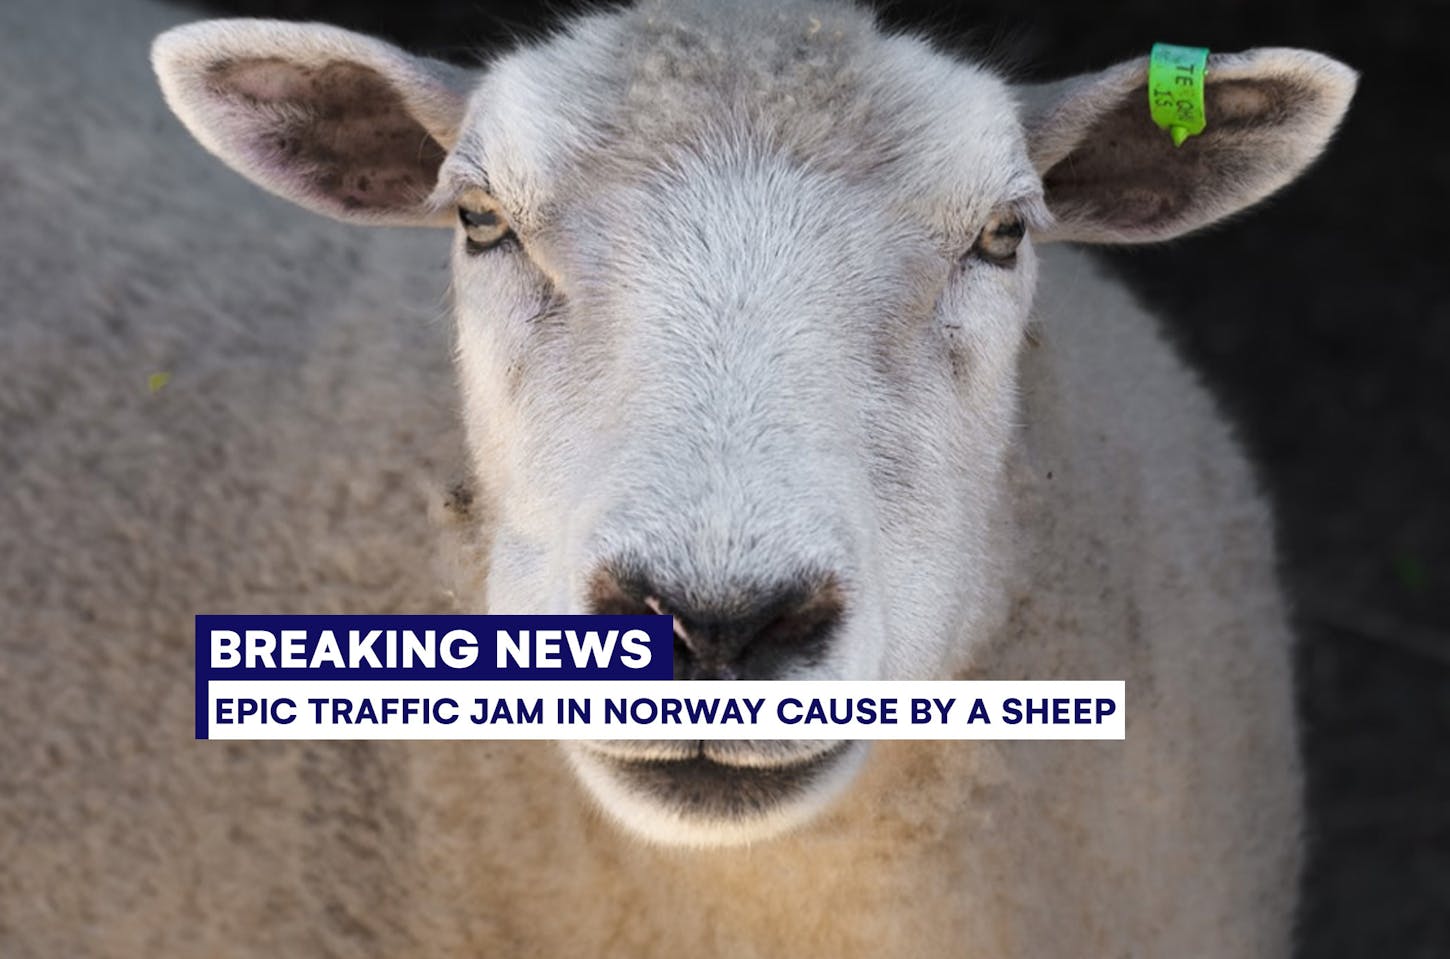 Funny Norwegian news during the silly season